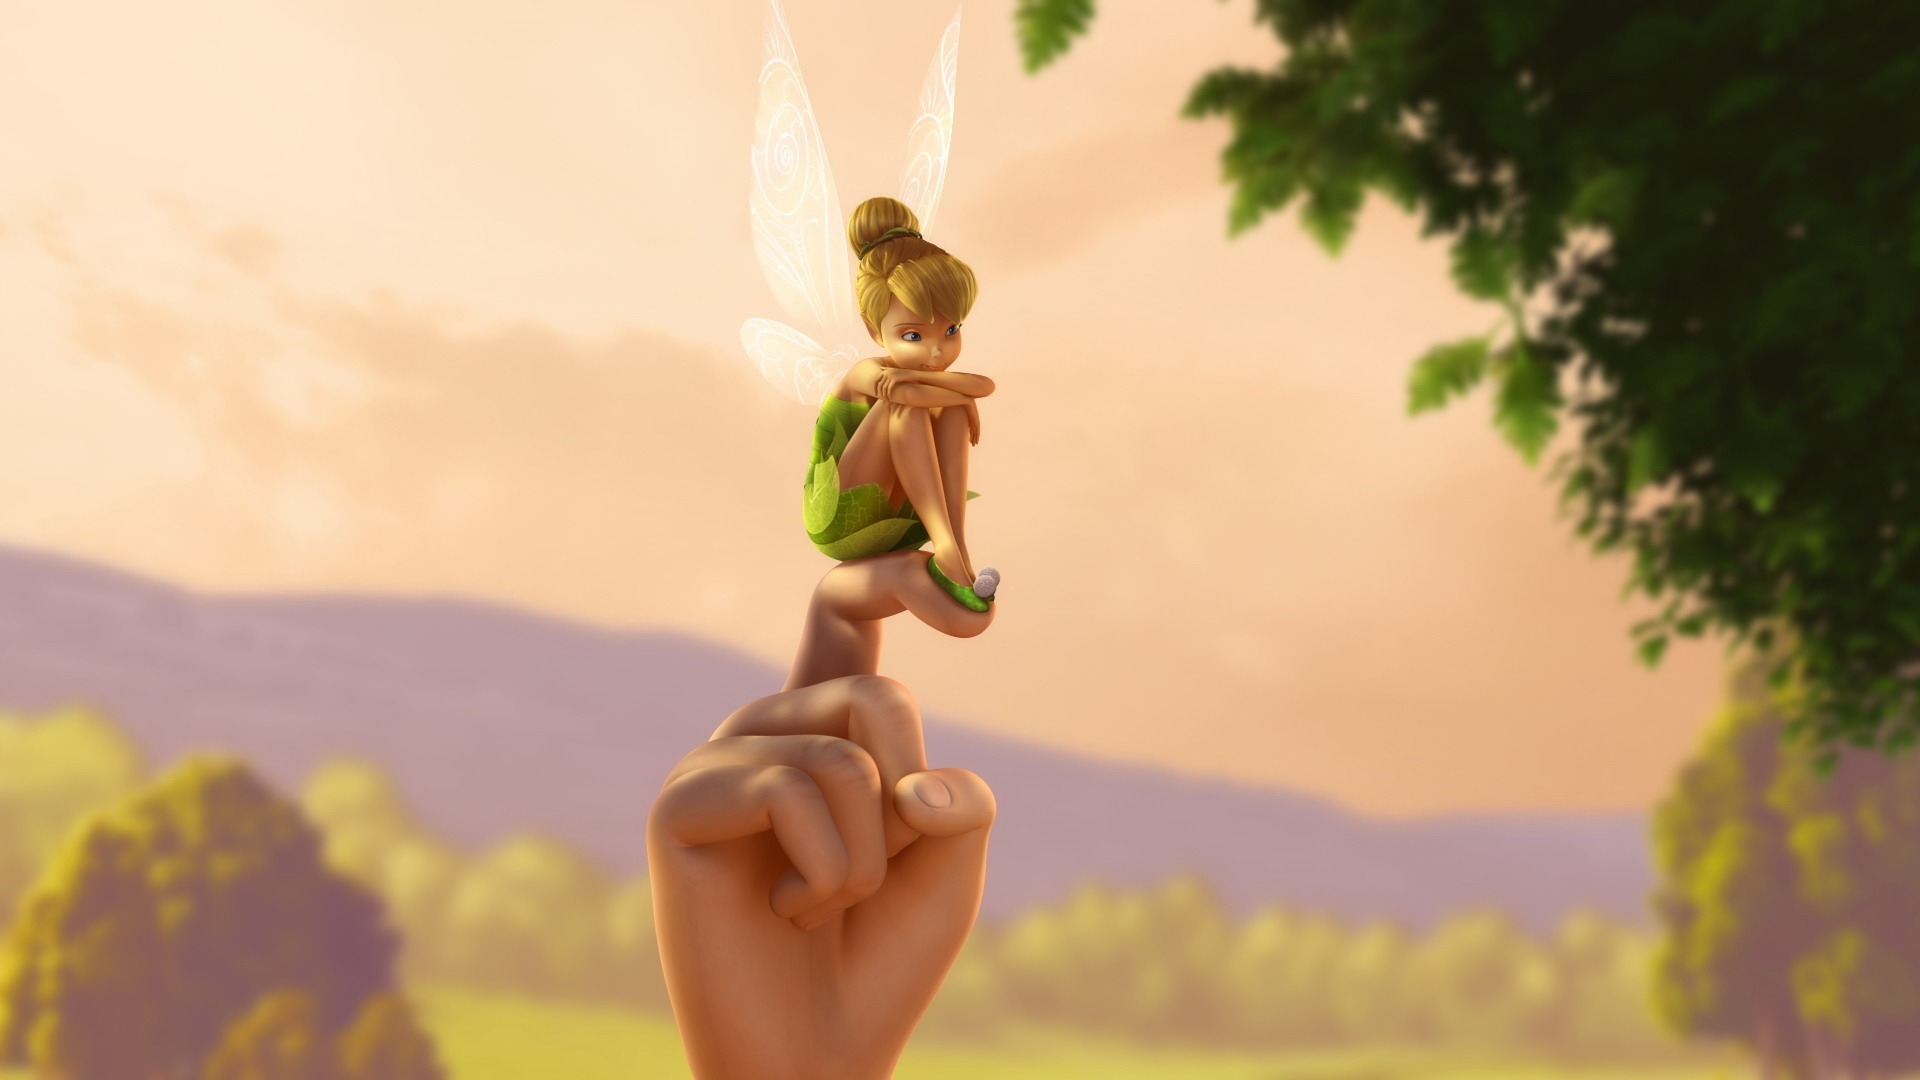 1920x1080 20+ Tinker Bell HD Wallpapers and Backgrounds